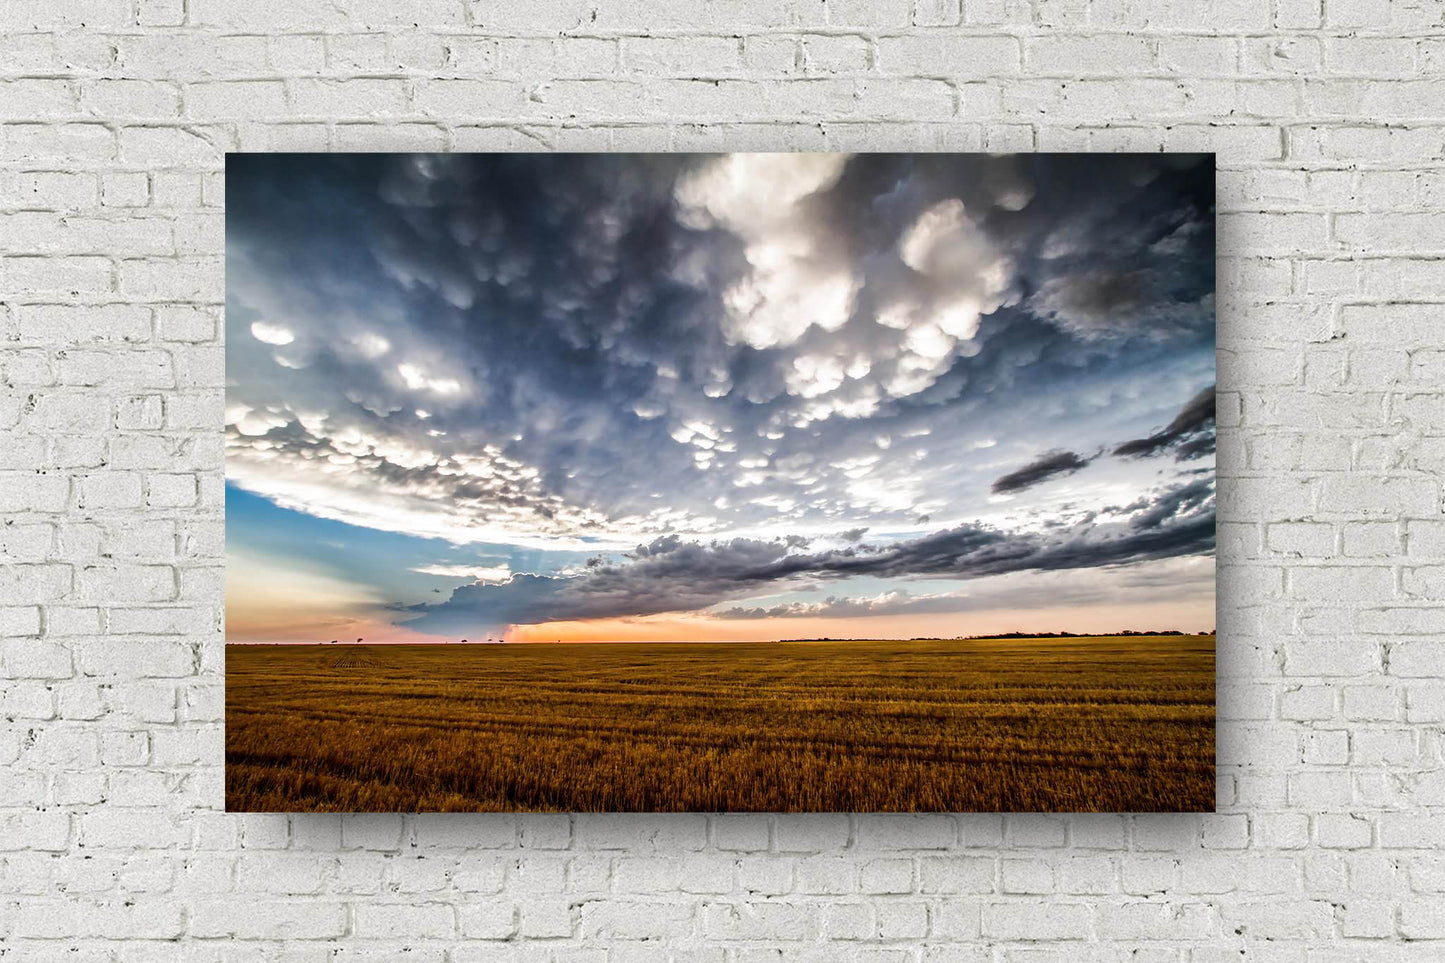 Scenic America metal print wall art of a spacious sky over a field at sunset after a stormy day in Texas by Sean Ramsey of Southern Plains Photography.